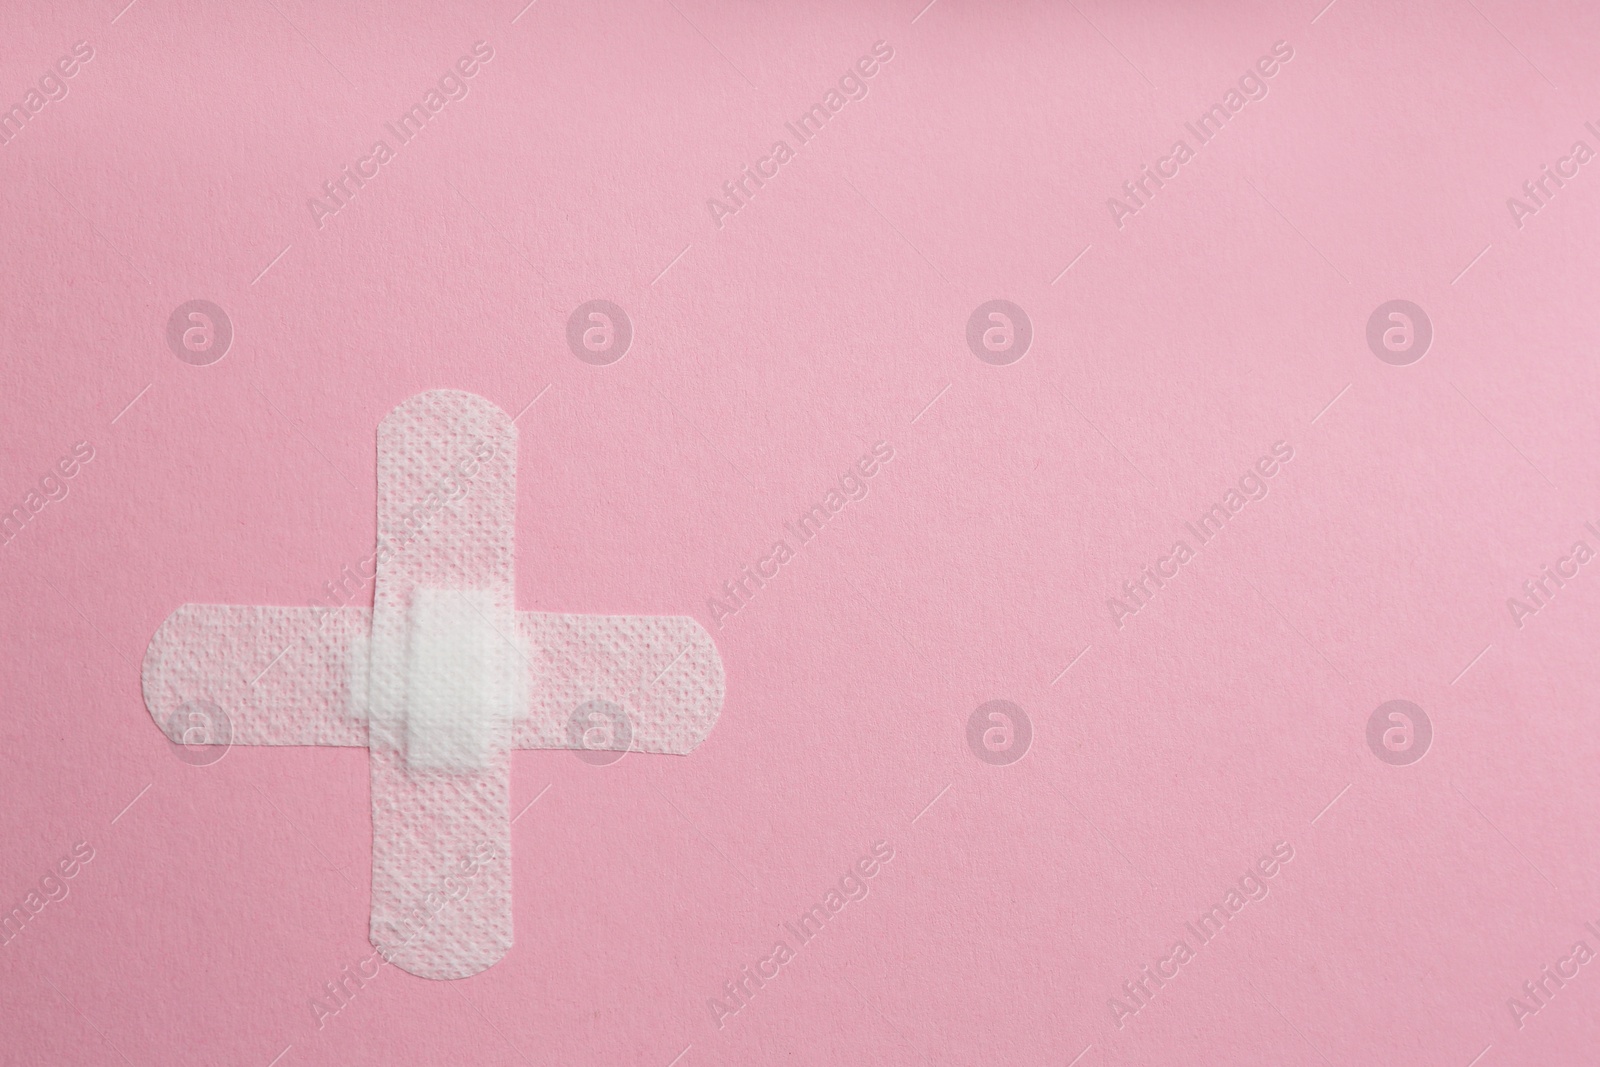 Photo of Sticking plasters on pink background, top view. Space for text